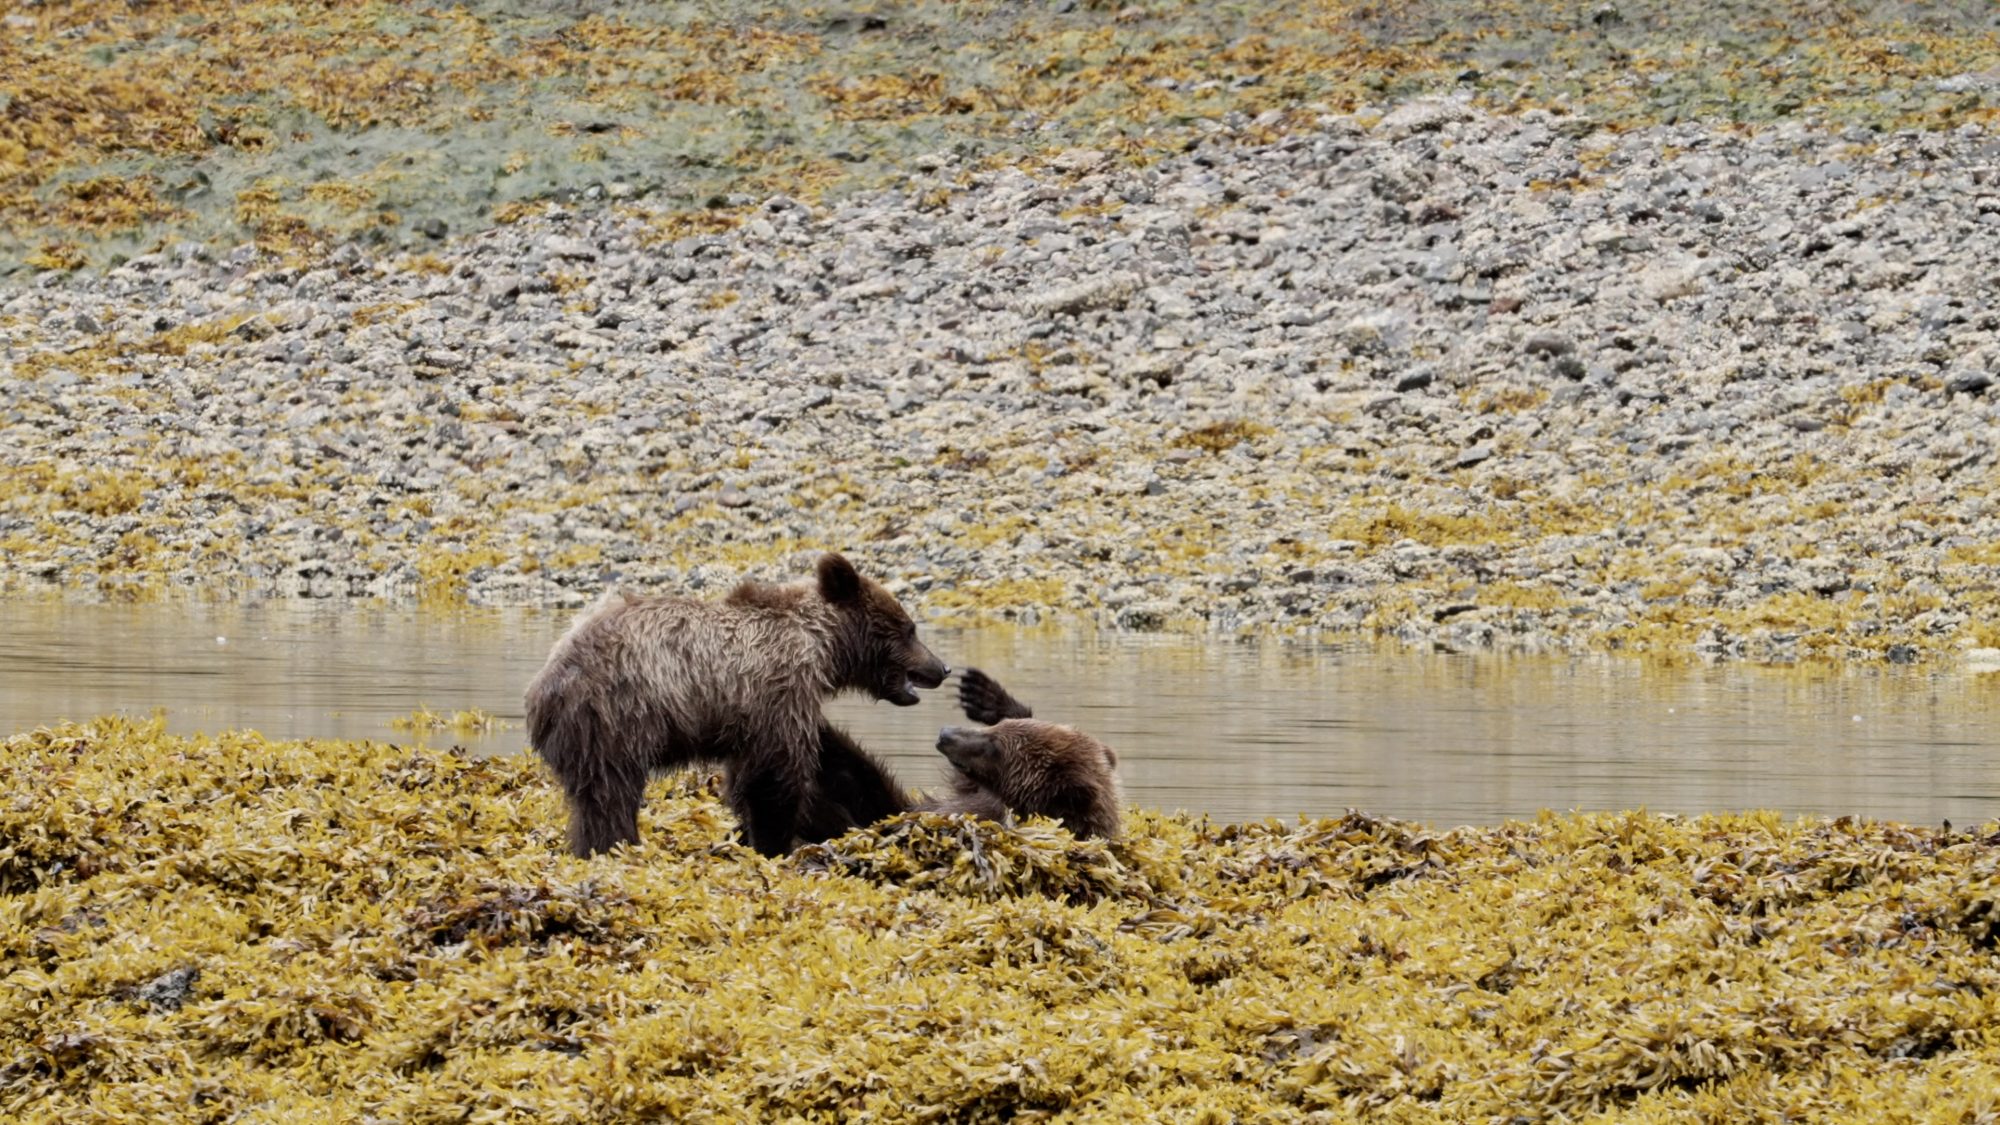 Two year old Grizzly Bears at play – Alaska 2023